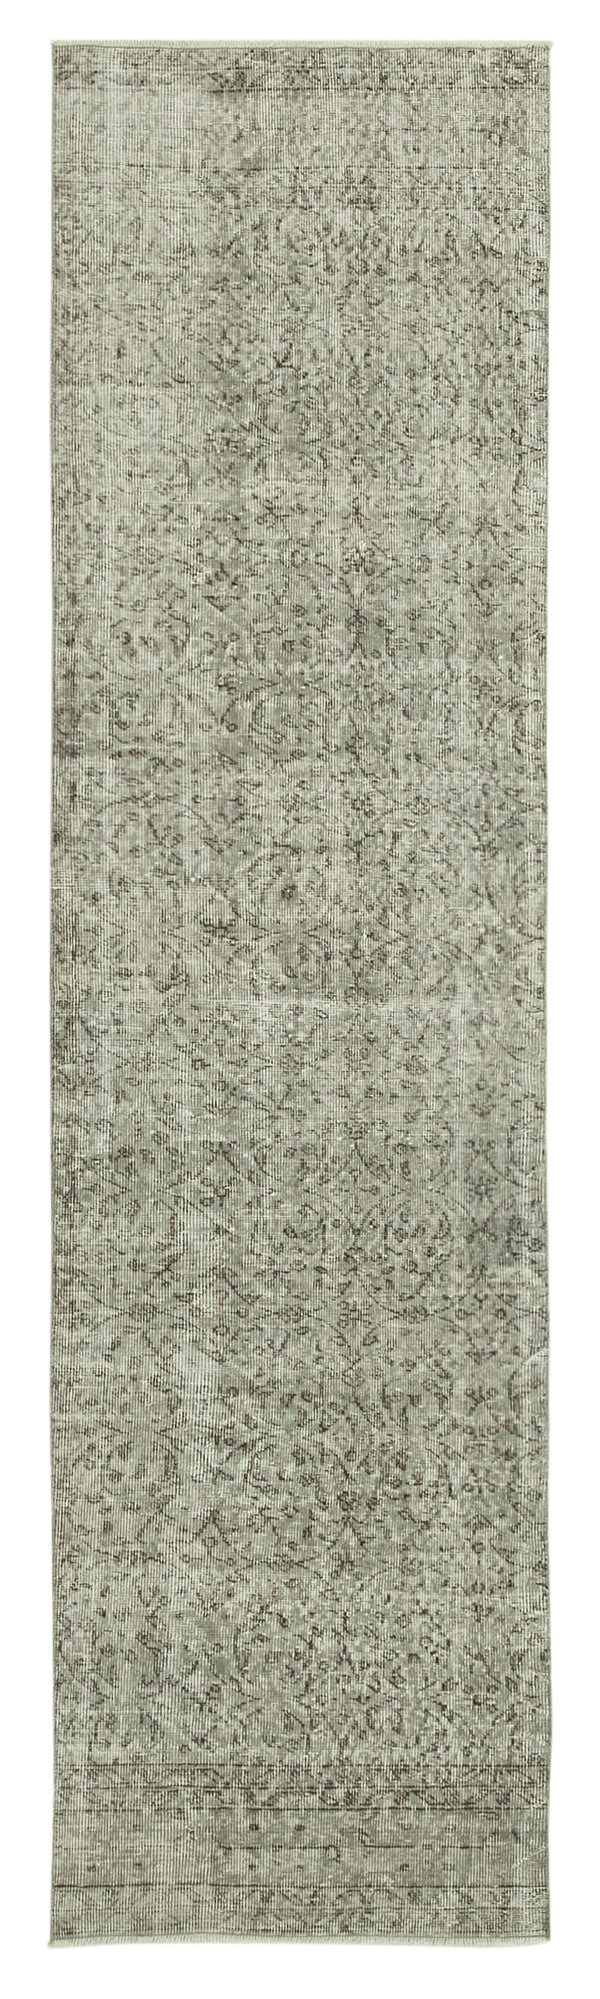 Handmade Overdyed Runner > Design# OL-AC-38171 > Size: 2'-8" x 9'-11", Carpet Culture Rugs, Handmade Rugs, NYC Rugs, New Rugs, Shop Rugs, Rug Store, Outlet Rugs, SoHo Rugs, Rugs in USA